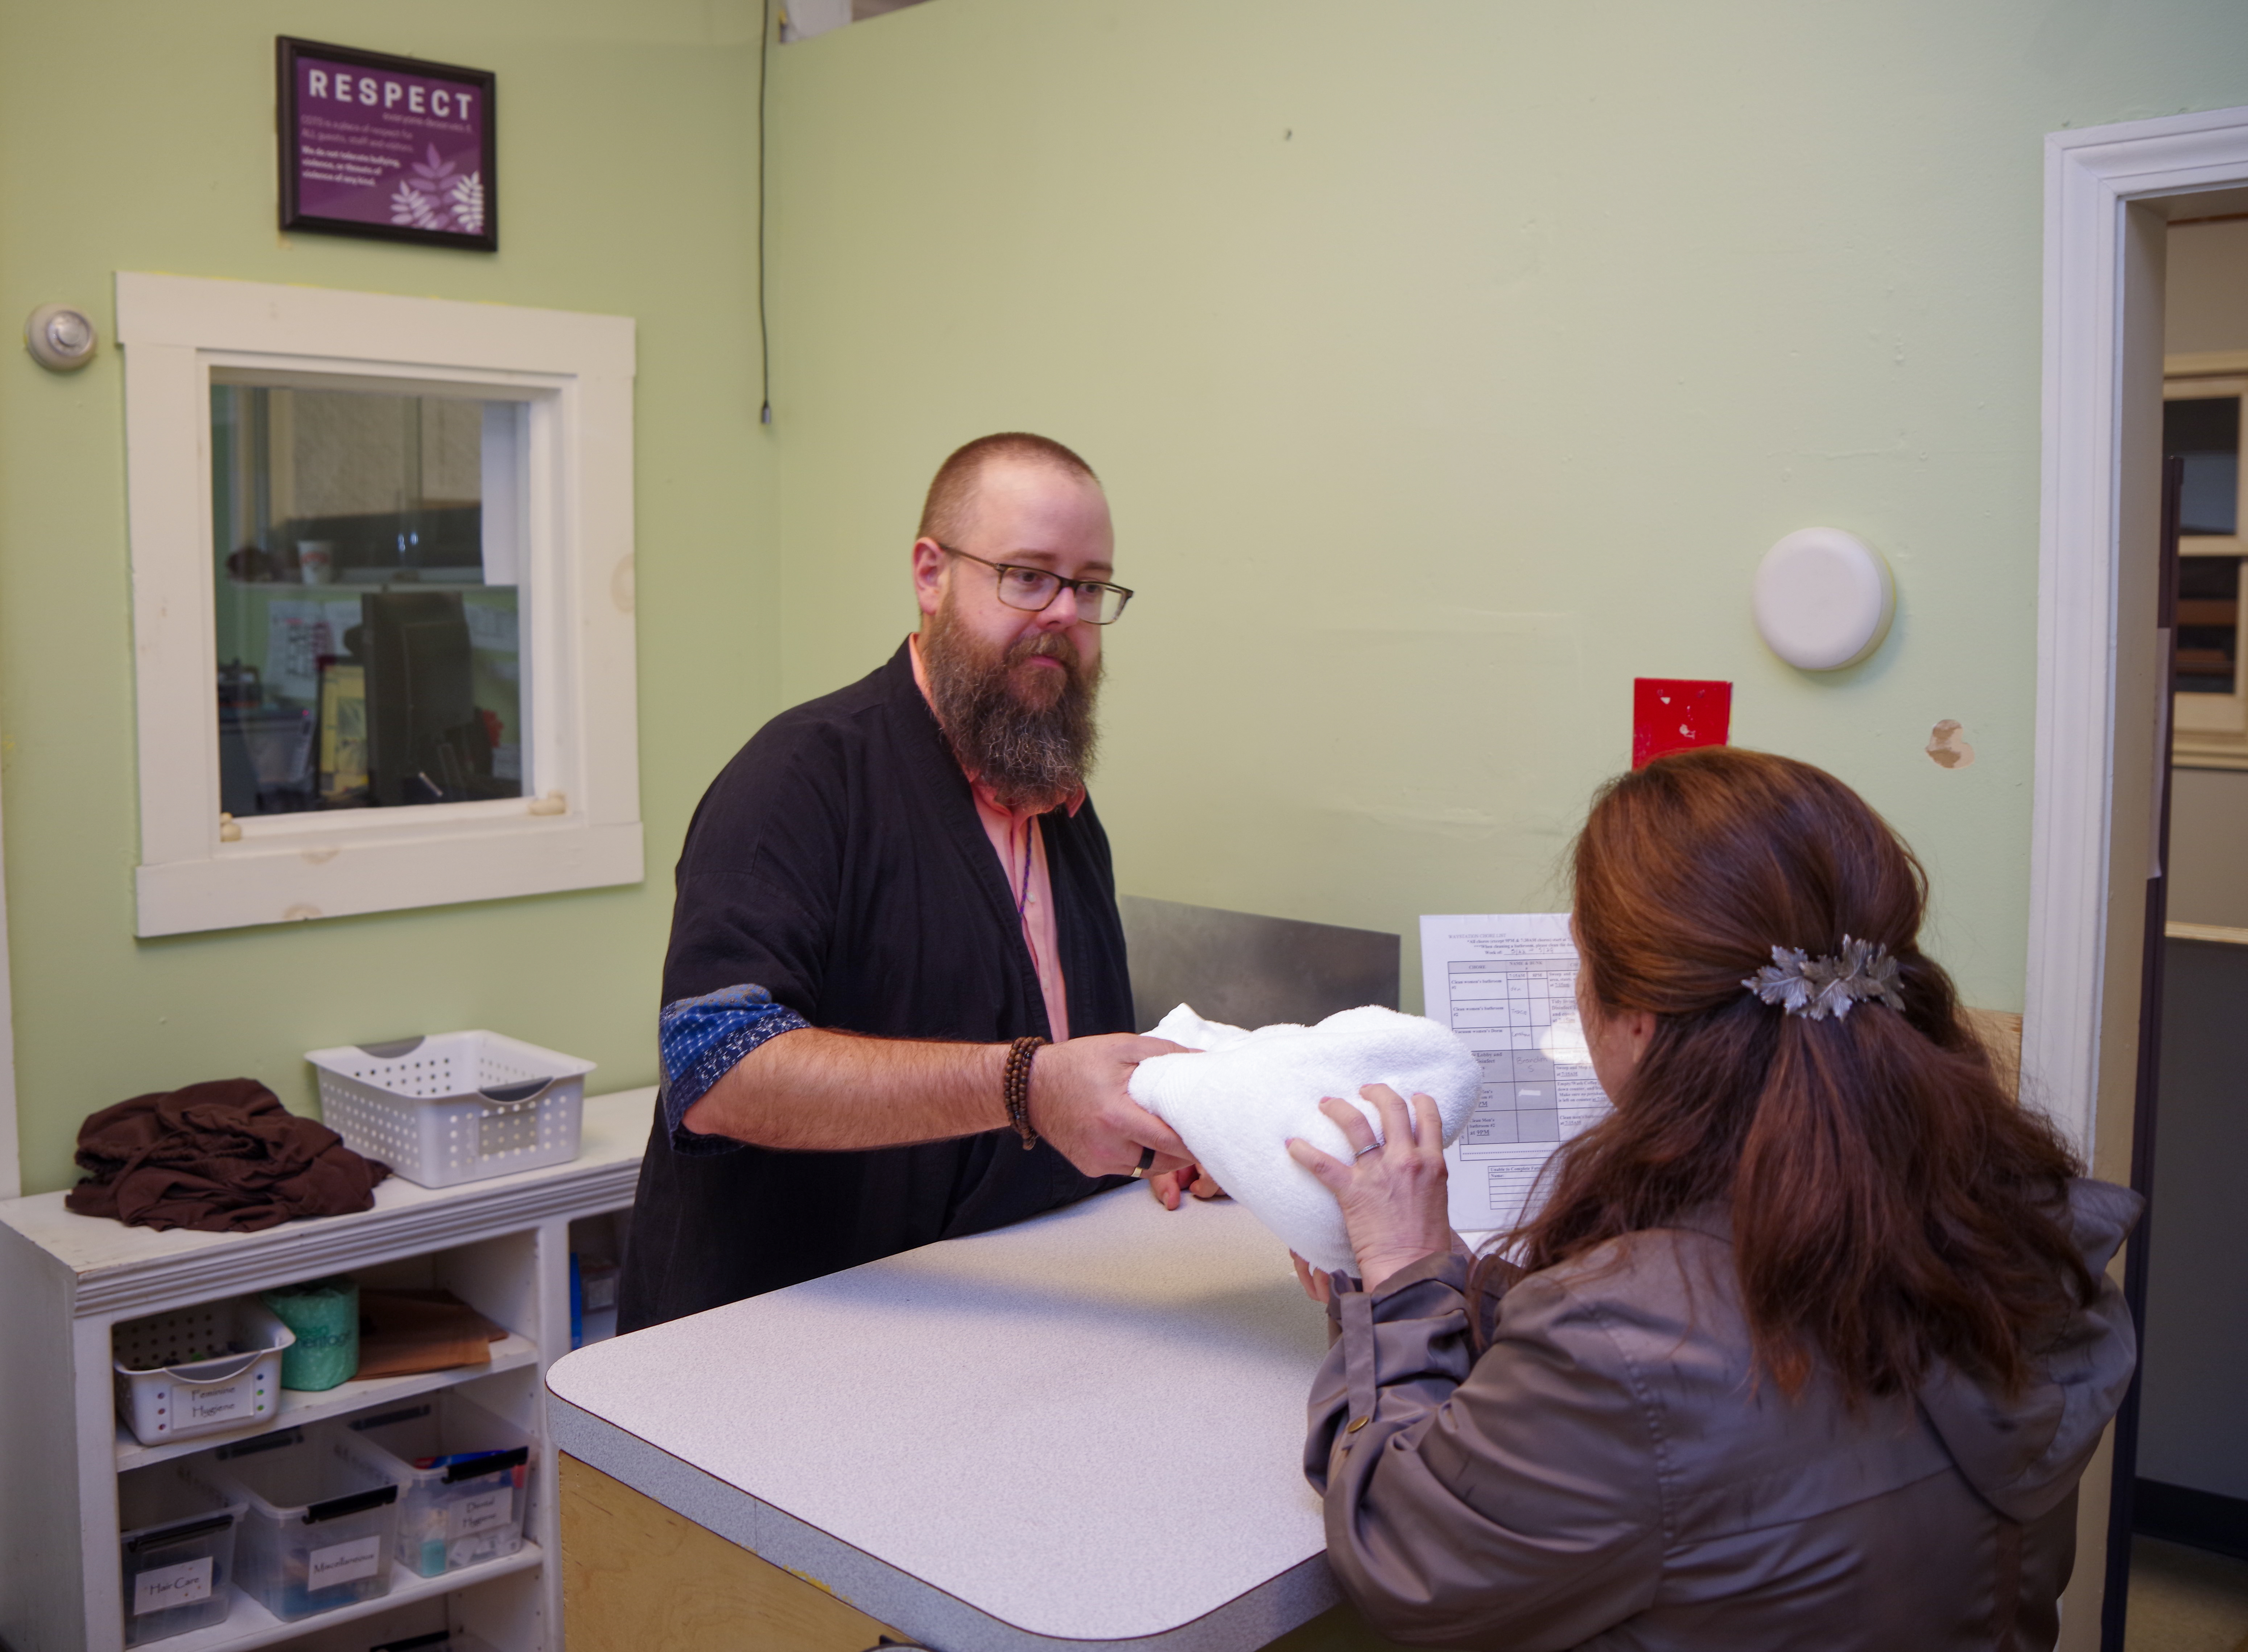 Male COTS staff member with a beard and glasses hands a woman a white towel over a counter.